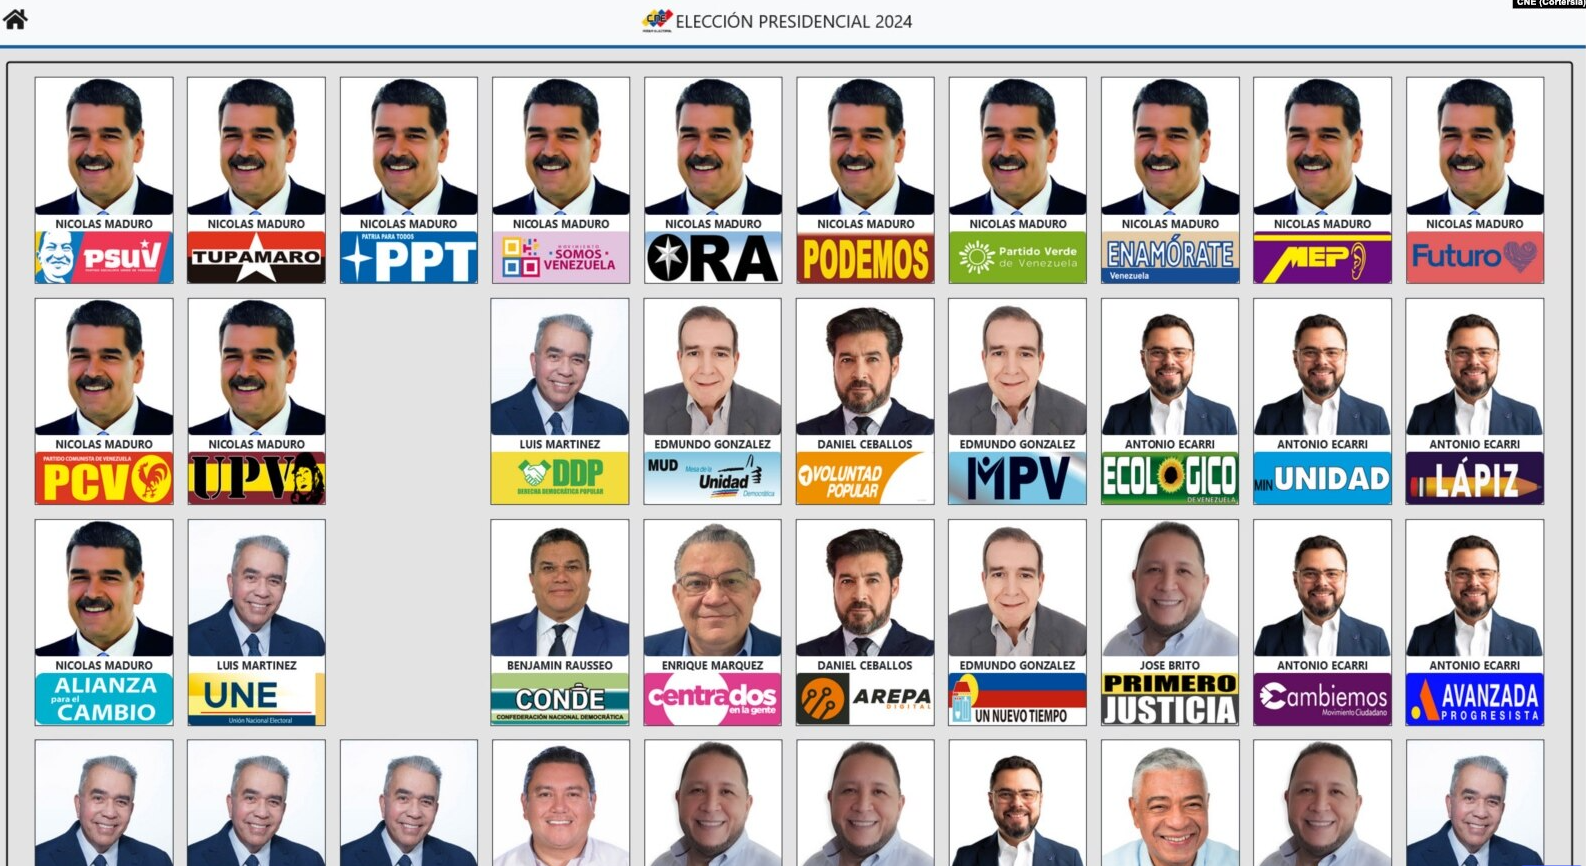 Nicolas Maduro's face appears 13 times in the electoral ballot in Venezuela. Why?